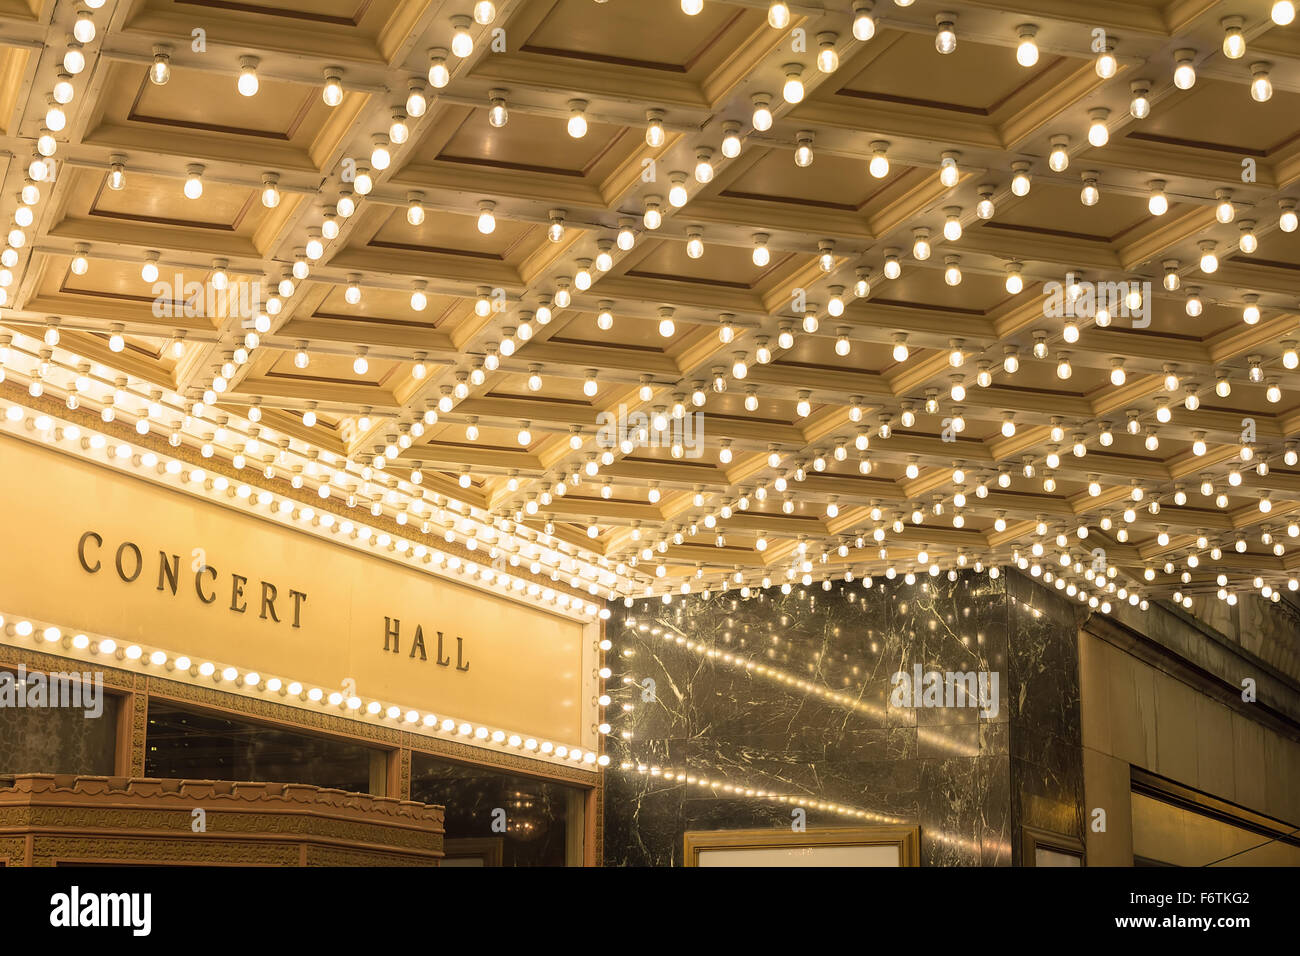 Marquee Lights on Broadway Theater Exterior Entrance Ceiling Stock Photo